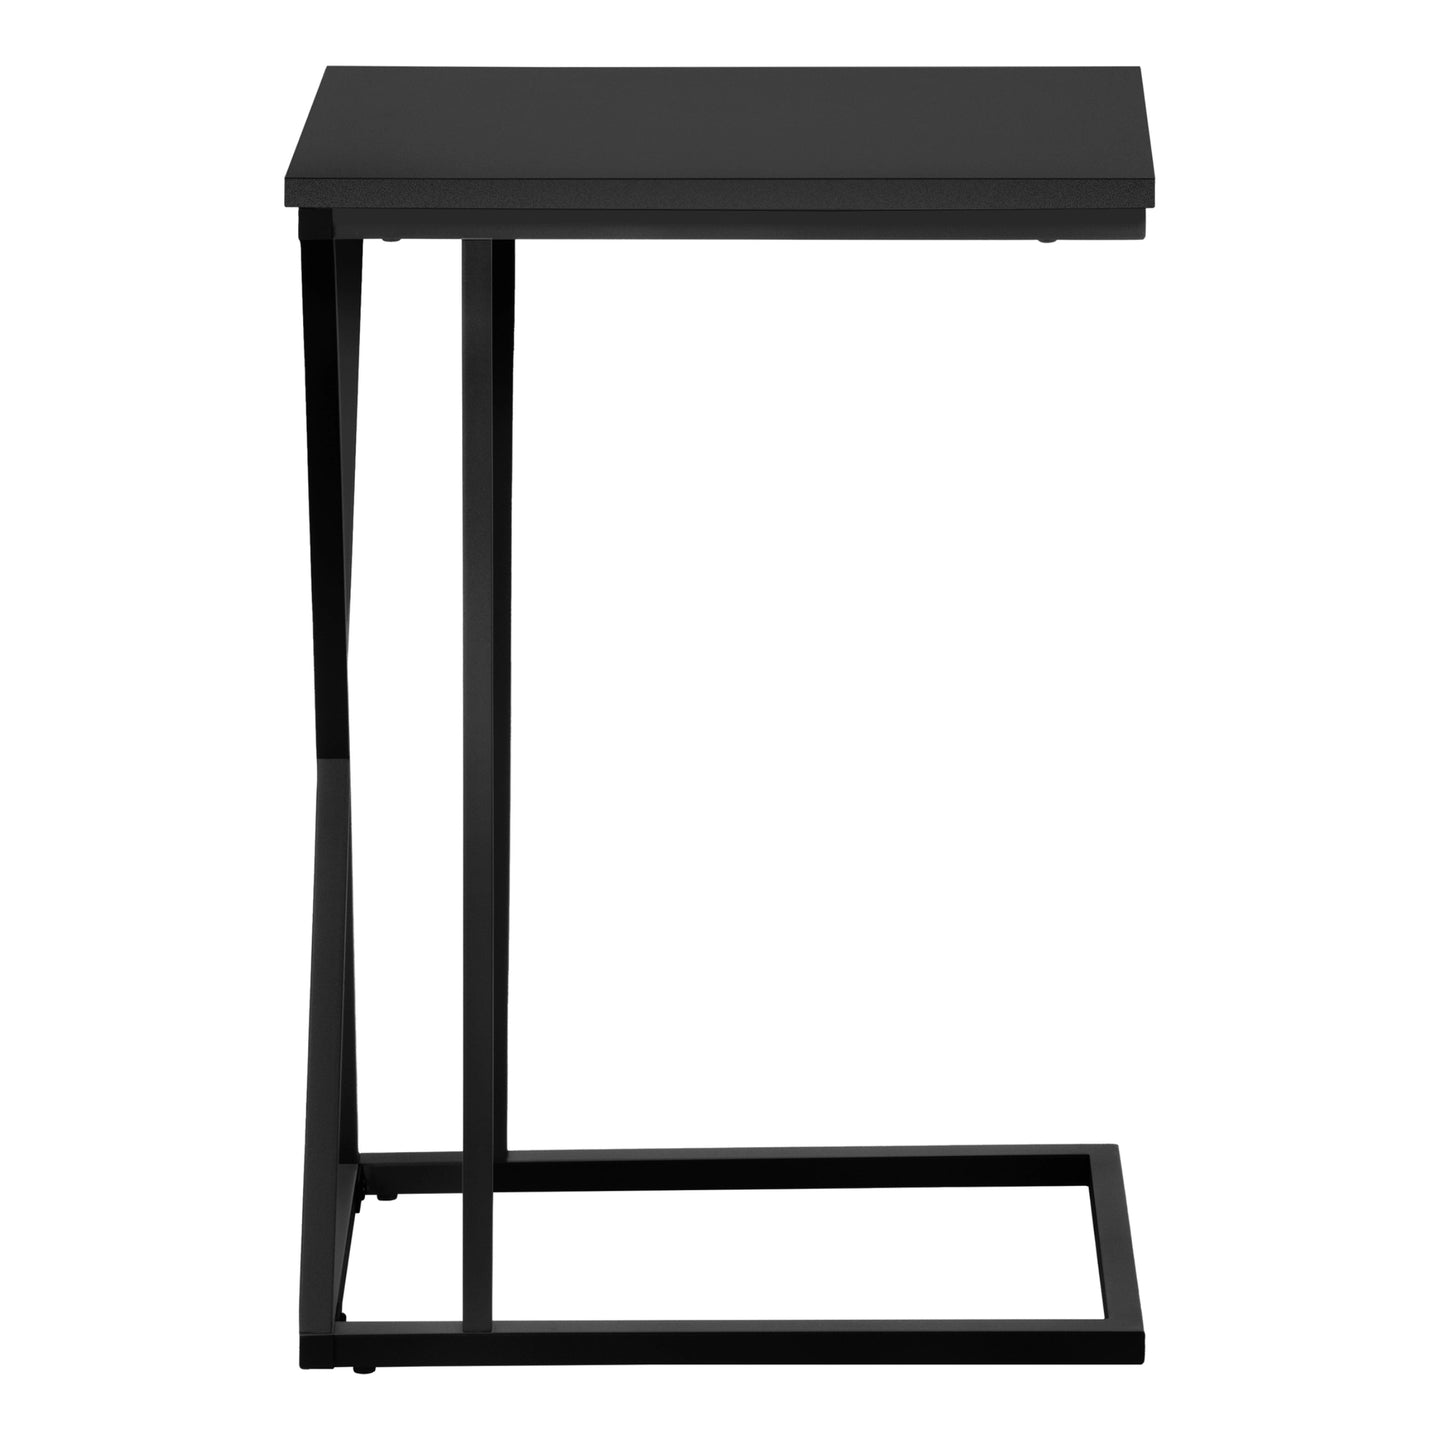 Black Accent Table / C Table - I 3247